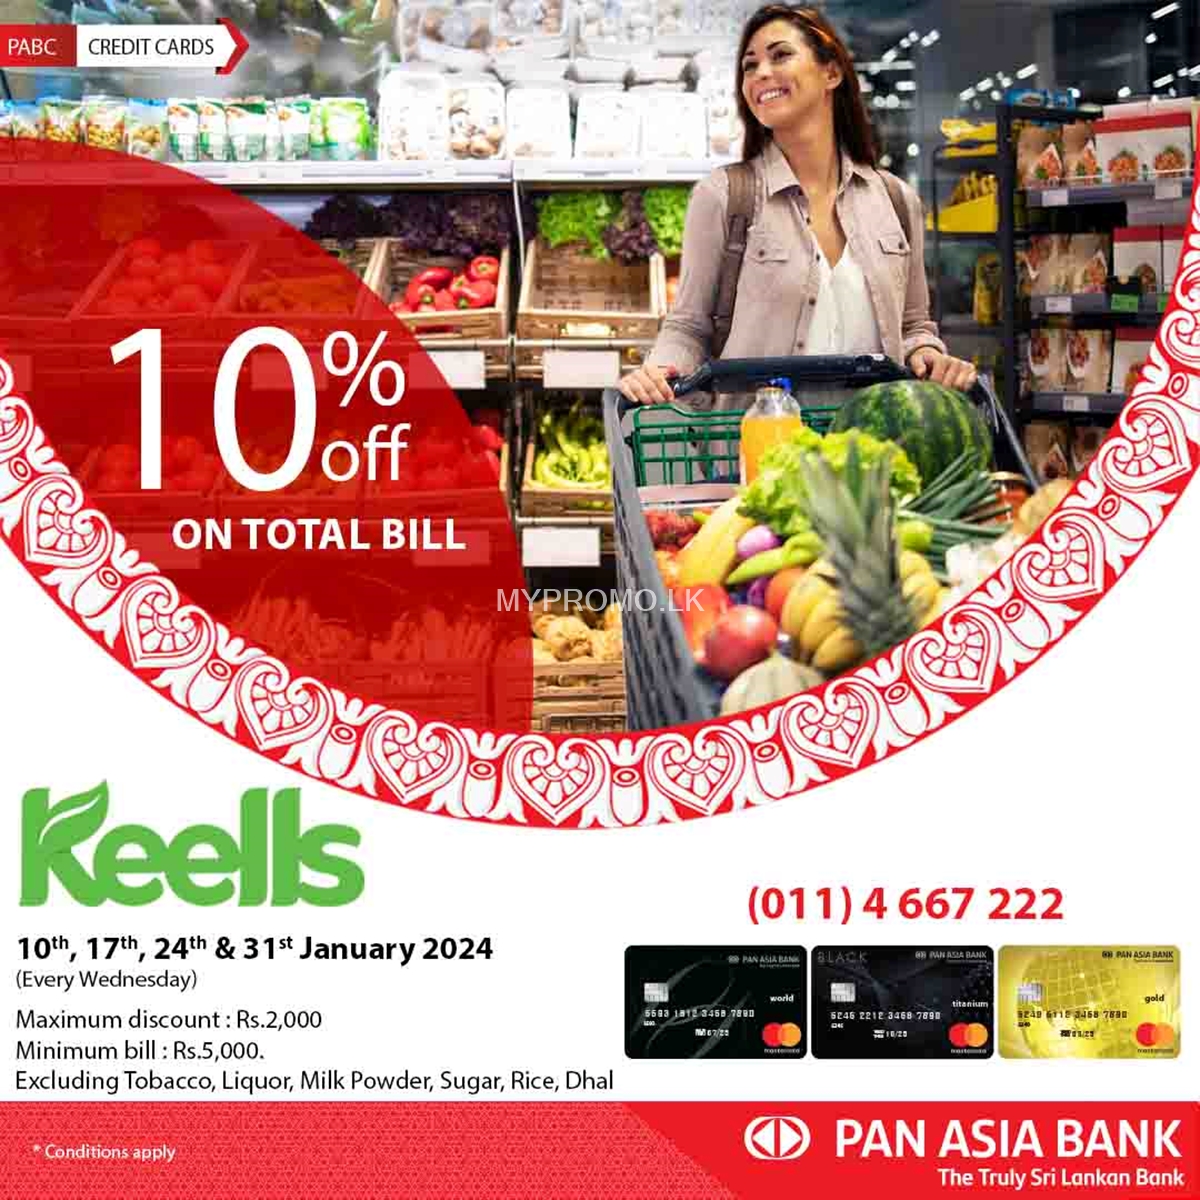 Get 10% off on Vegetables, Fruits, and Seafood at Keells with your Pan Asia Bank Credit Card